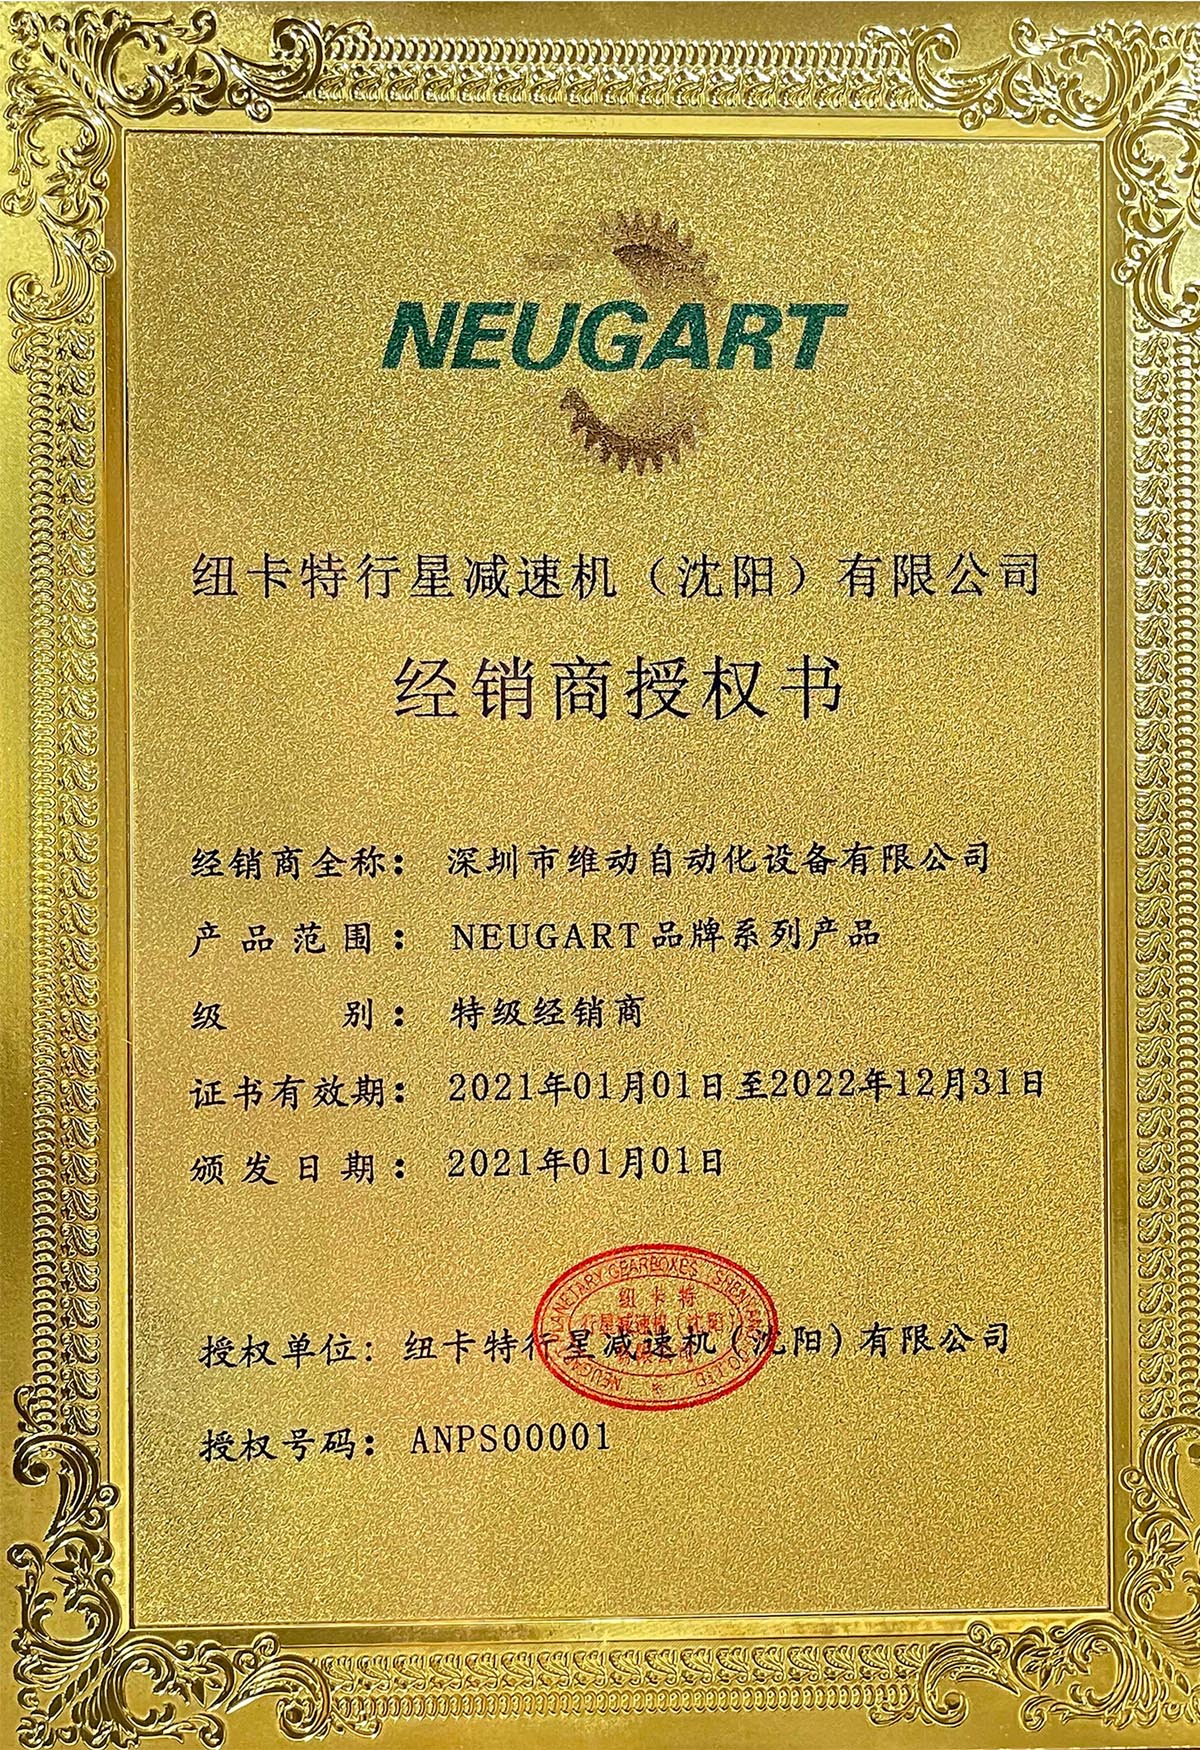 Special agent authorization of Neugart planetary reducer